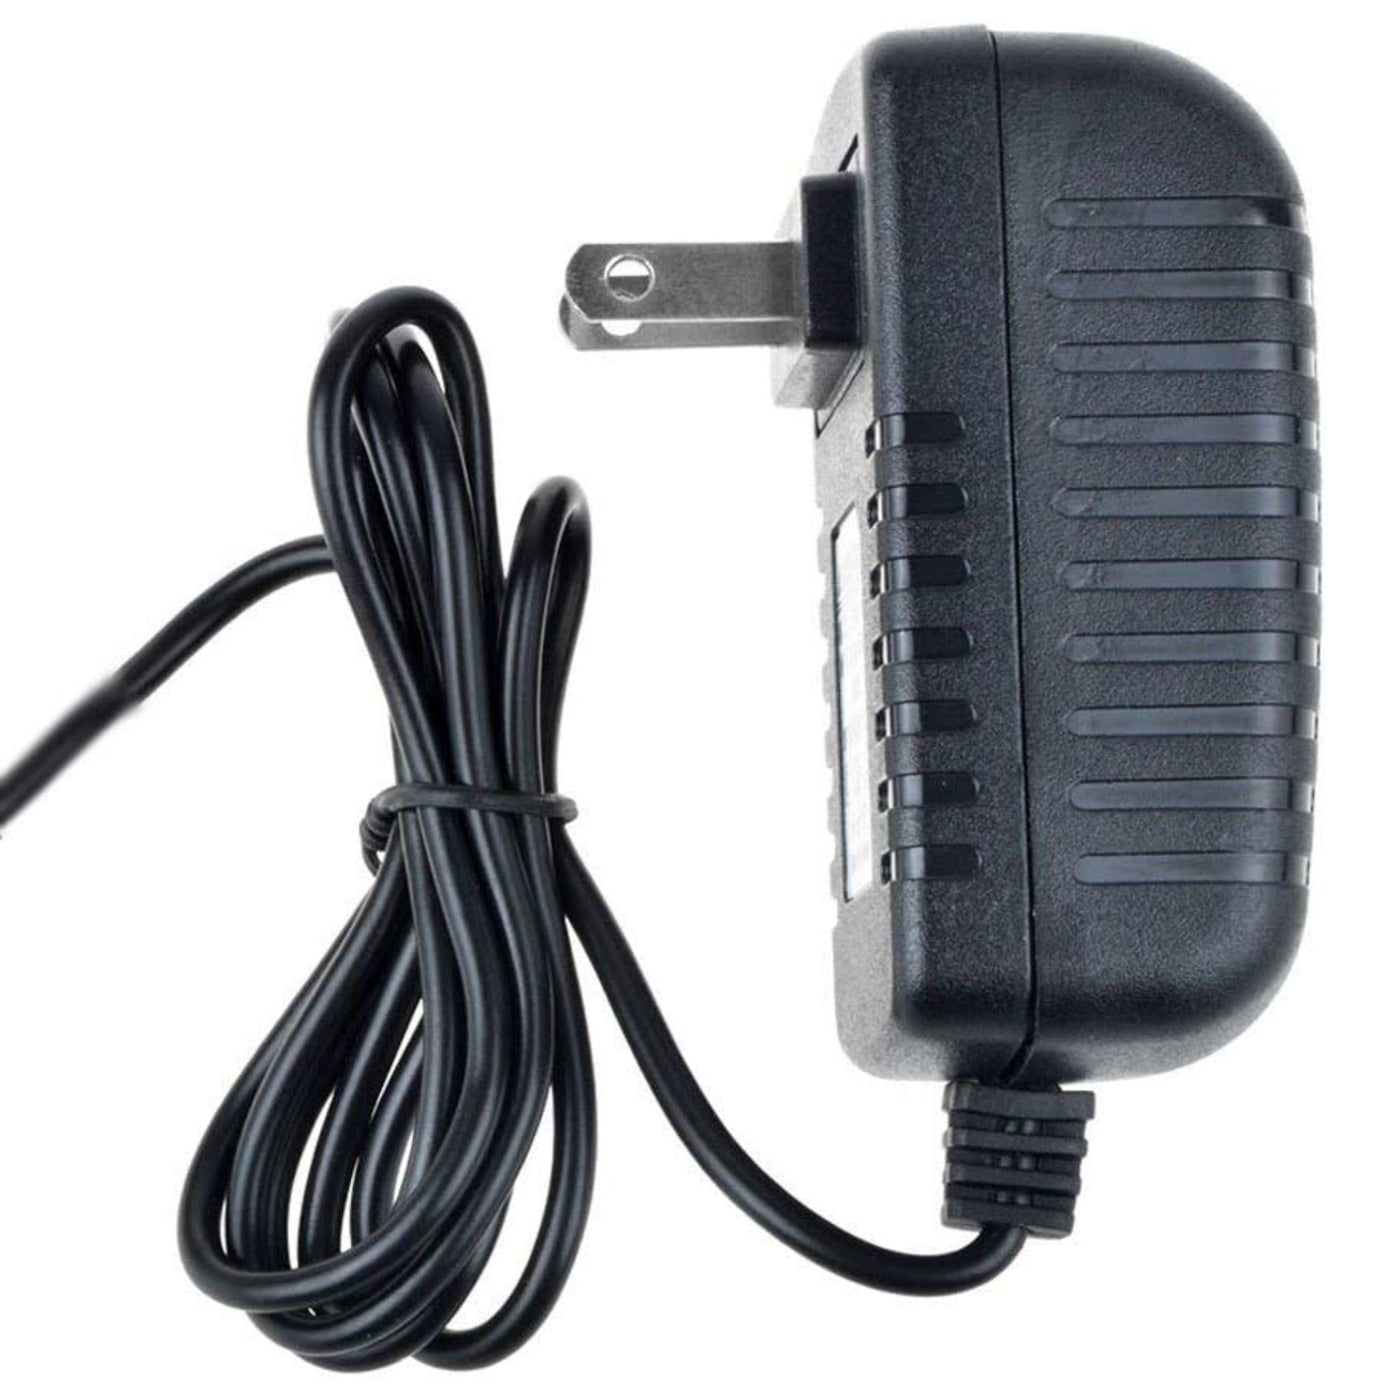 LKPower AC/DC Adapter Charger Compatible with Korg 405016000 Digital Piano Keyboard Power Cord